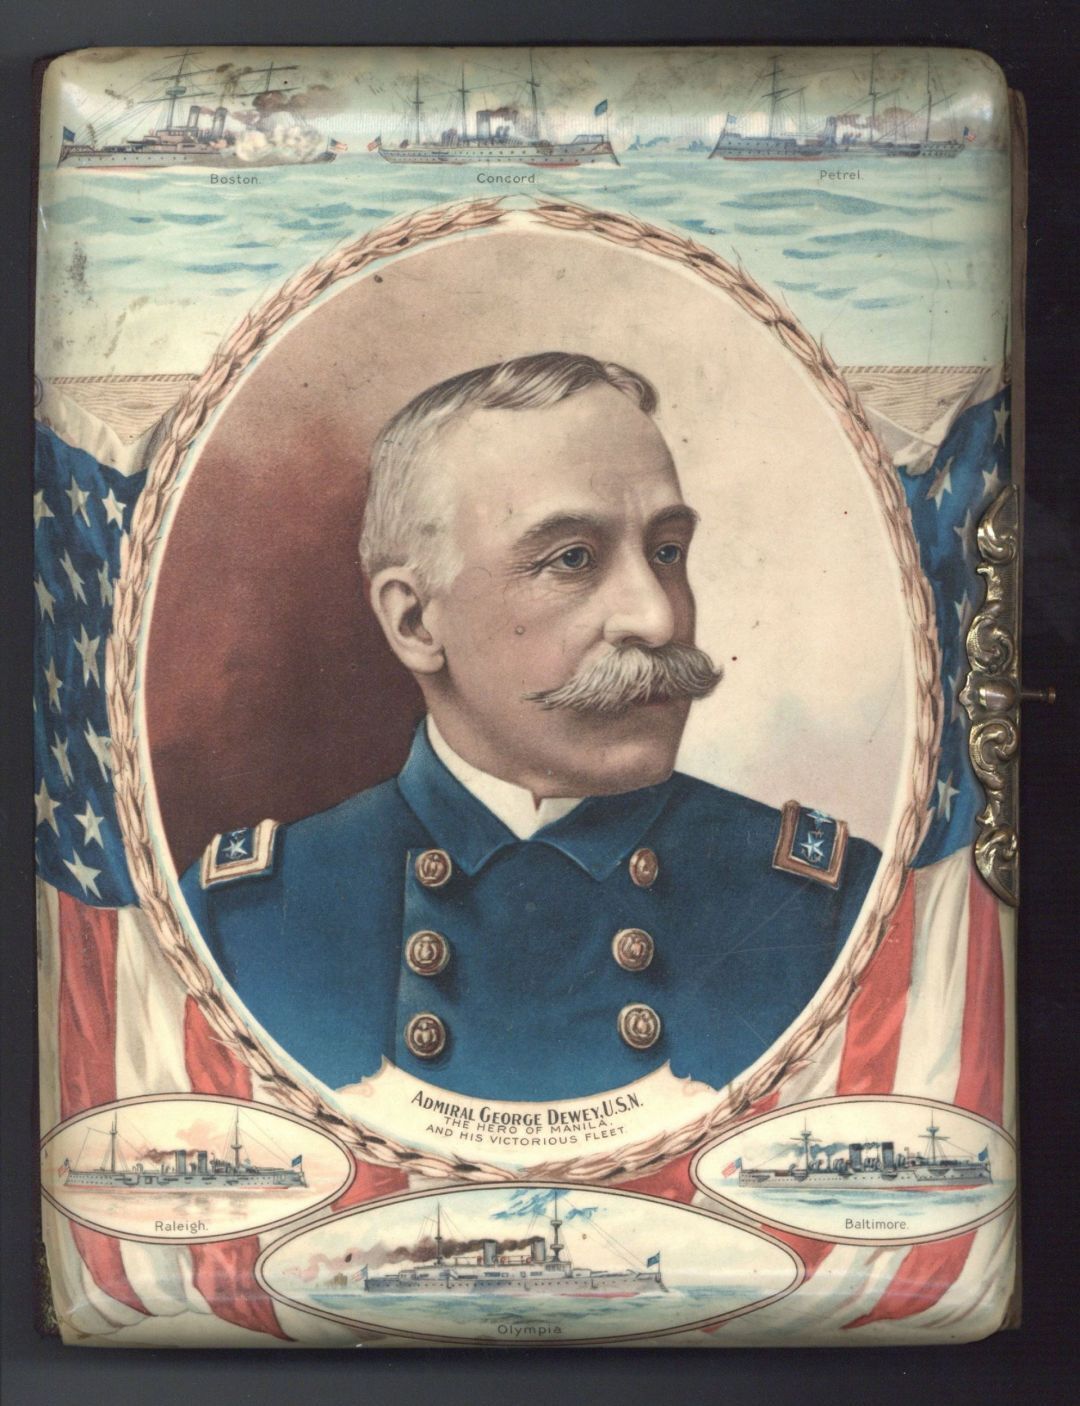 Admiral Dewey Covered Photo Album - Americana - Autographs of Famous People